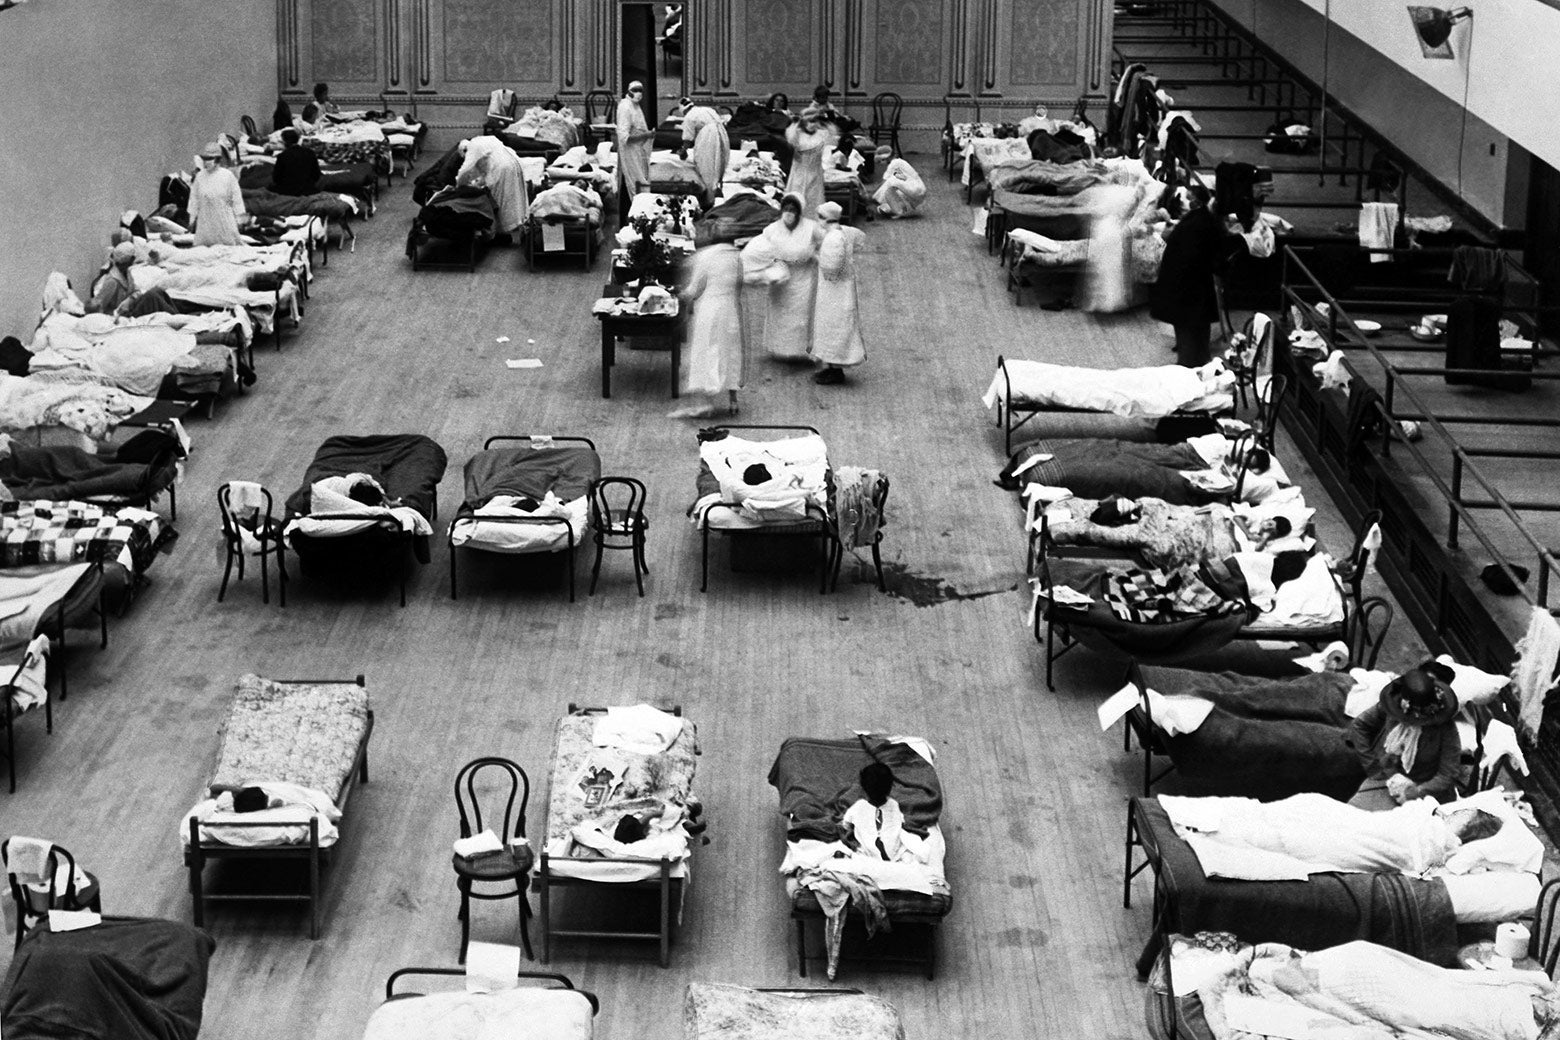 A black-and-white photo of sick beds in an auditorium.